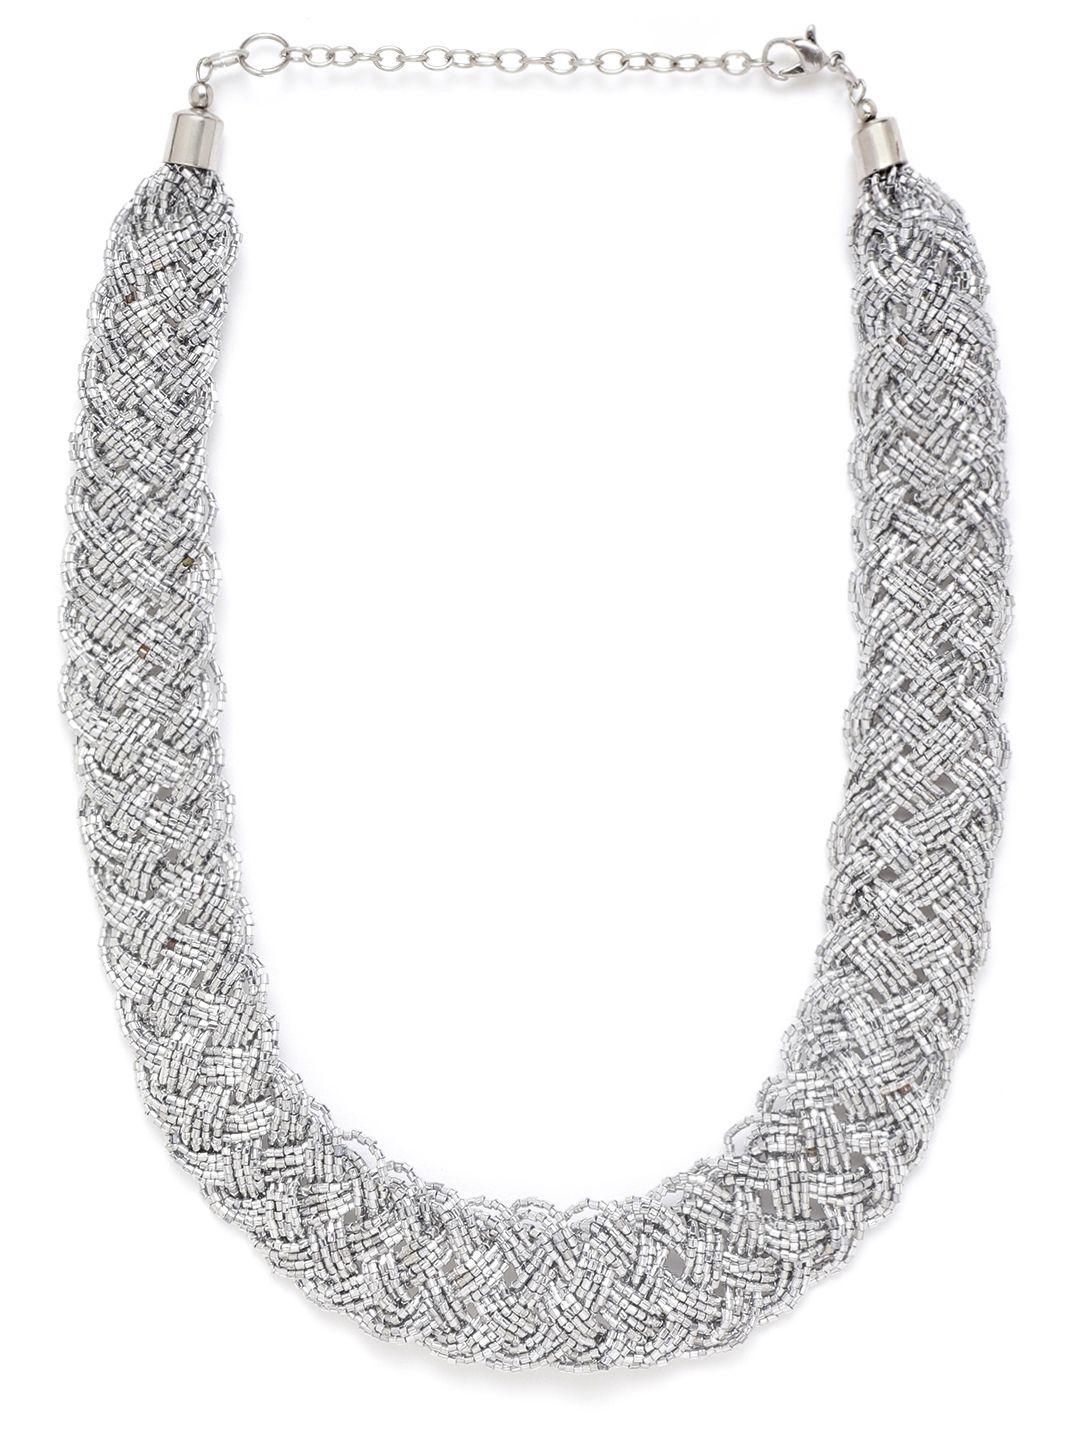 richeera silver-toned beaded braided necklace